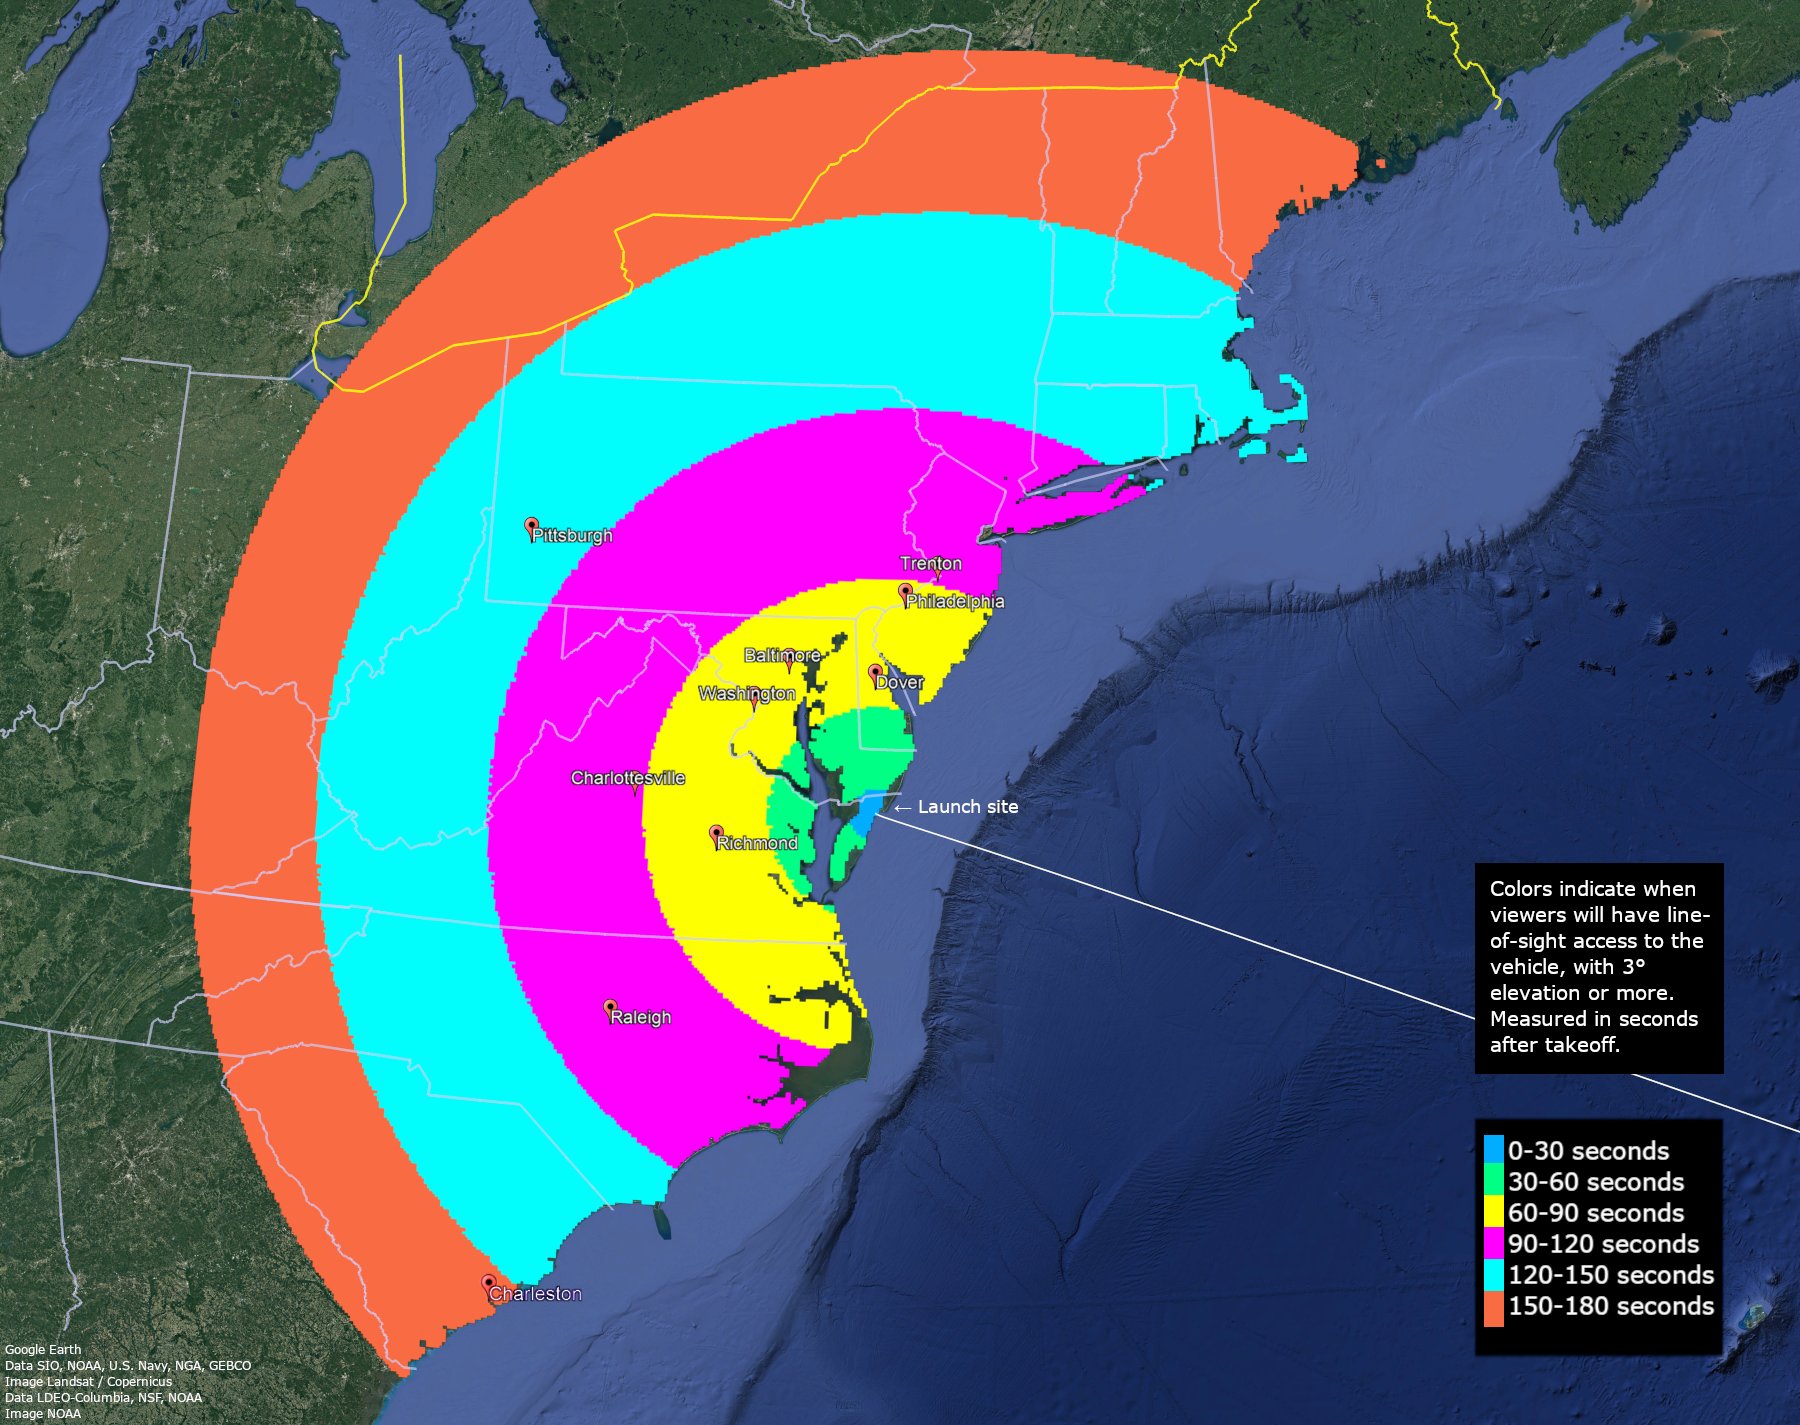 A visibility map released by NASA's Wallops Flight Facility on Wallops Island, Virginia.